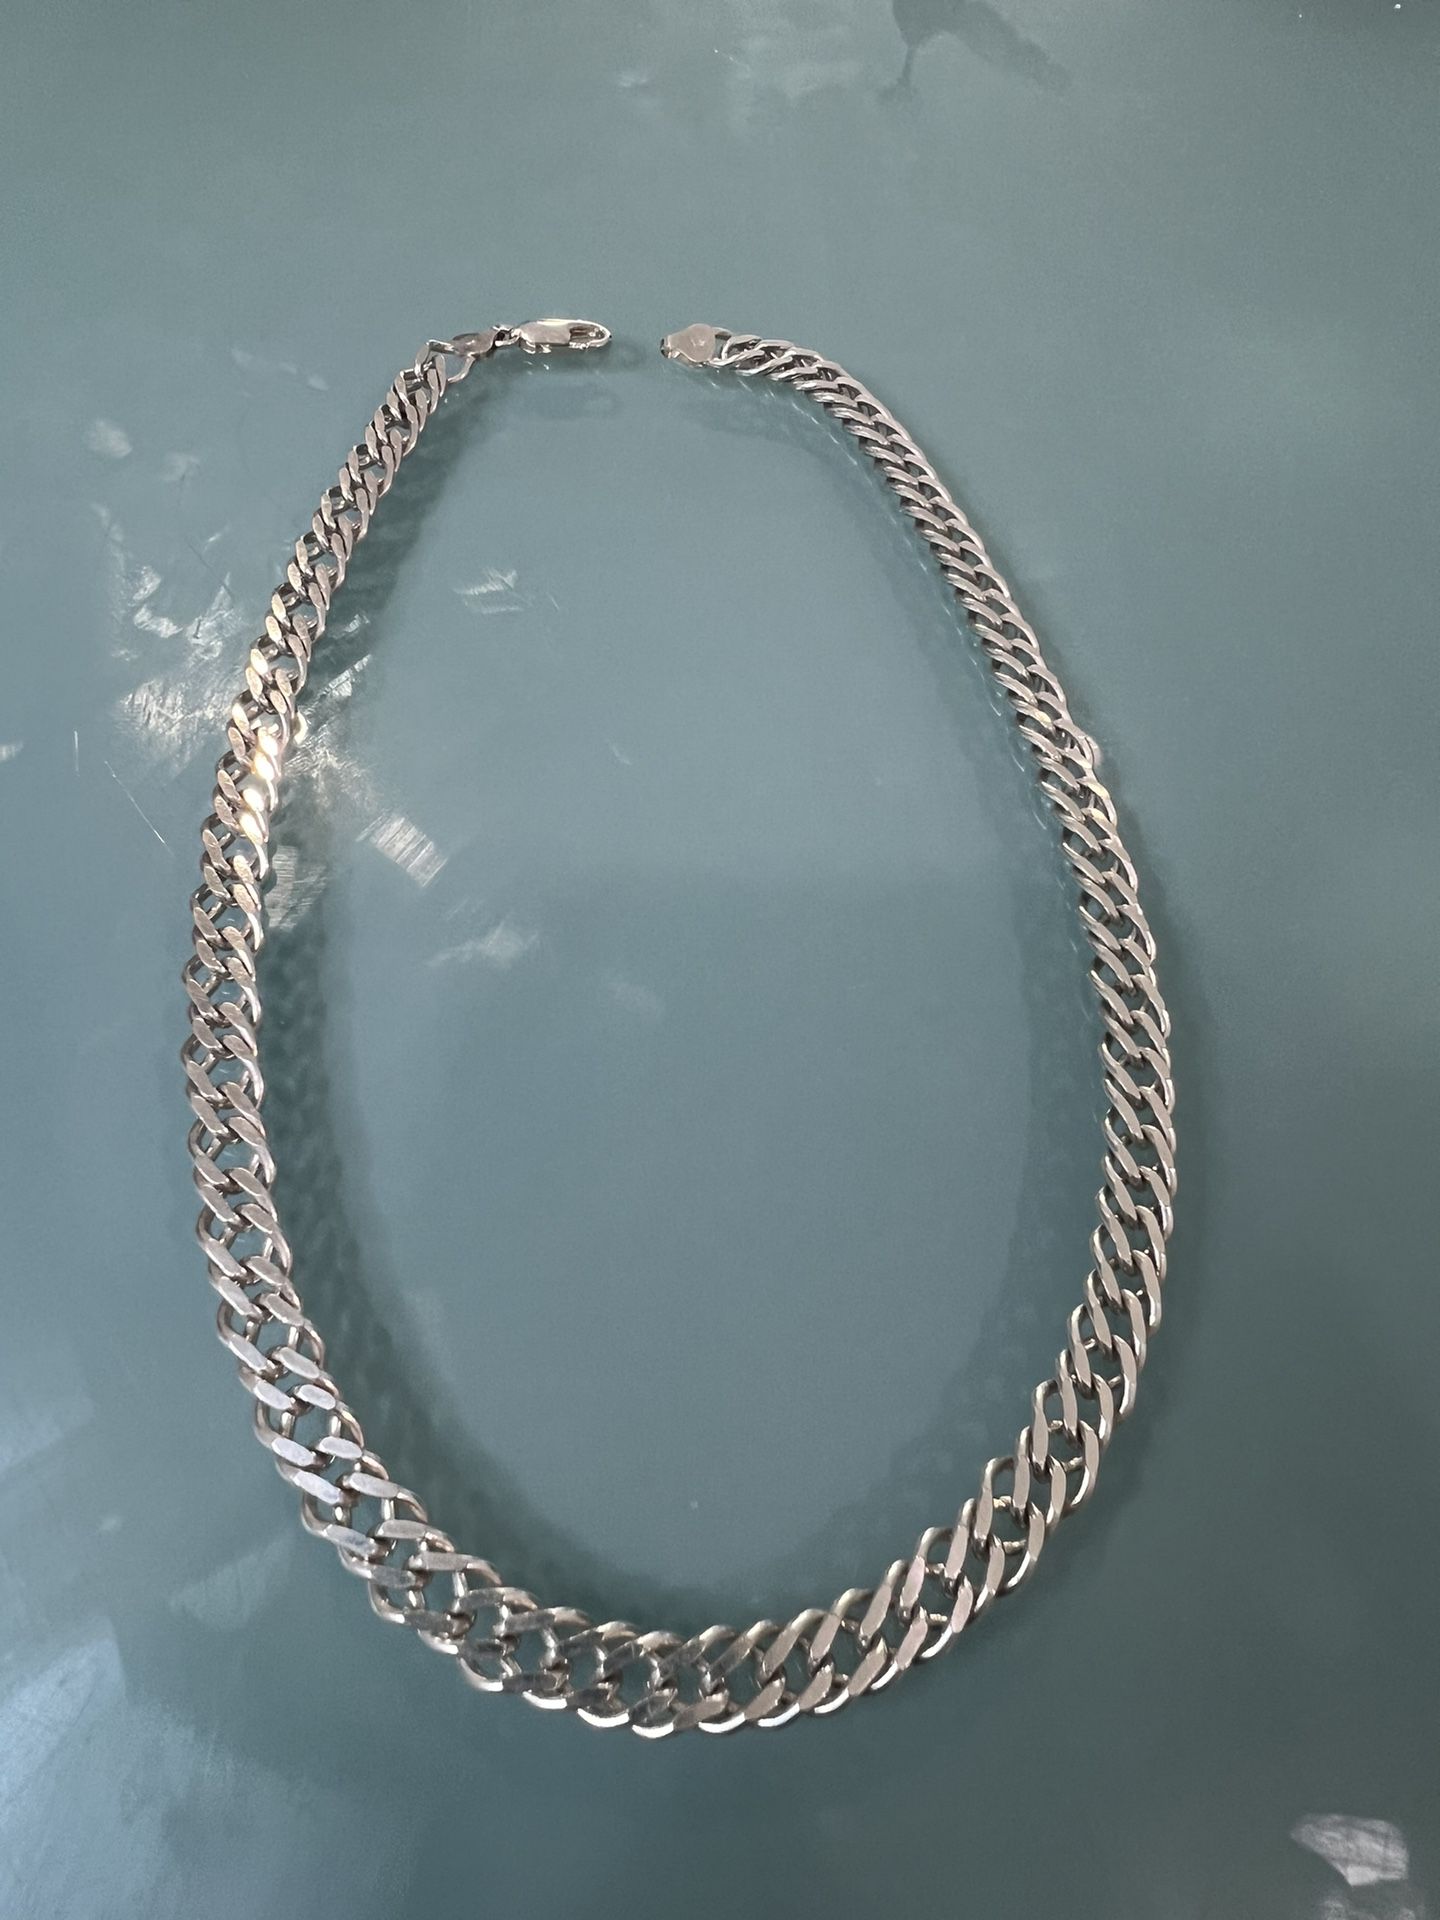 Italy Sterling Silver Extra Fancy Double Curb Link 48.7g Necklace *L@@K*”